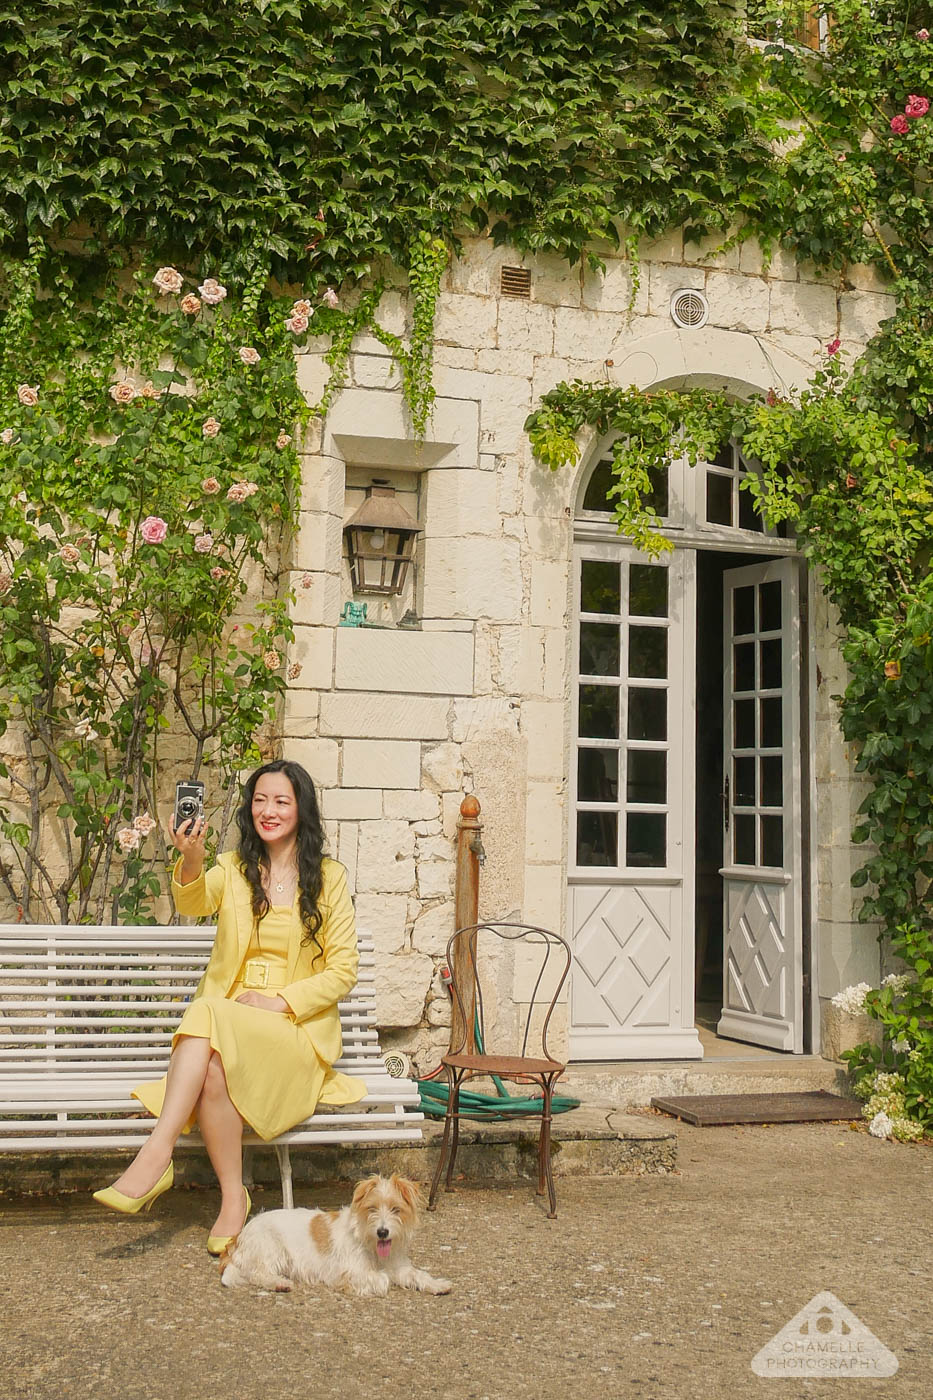 Emily in Paris - filming locations - Camille family Chateau de Sonnay - Chamelle Photography